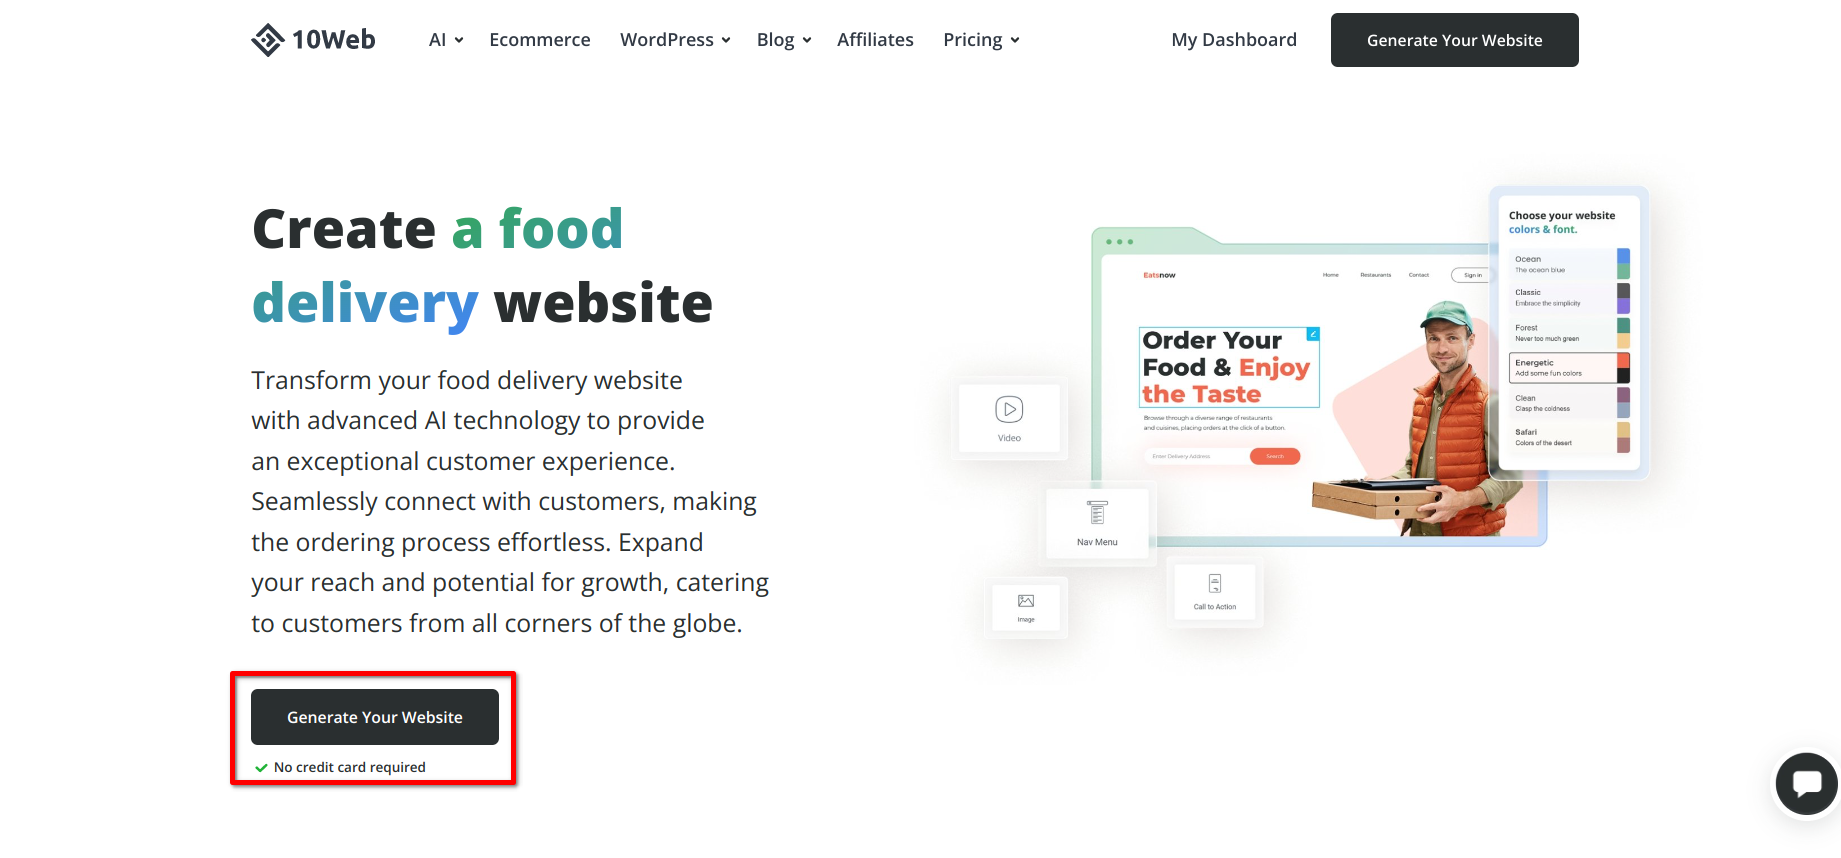 10Web Create a food delivery website landing page